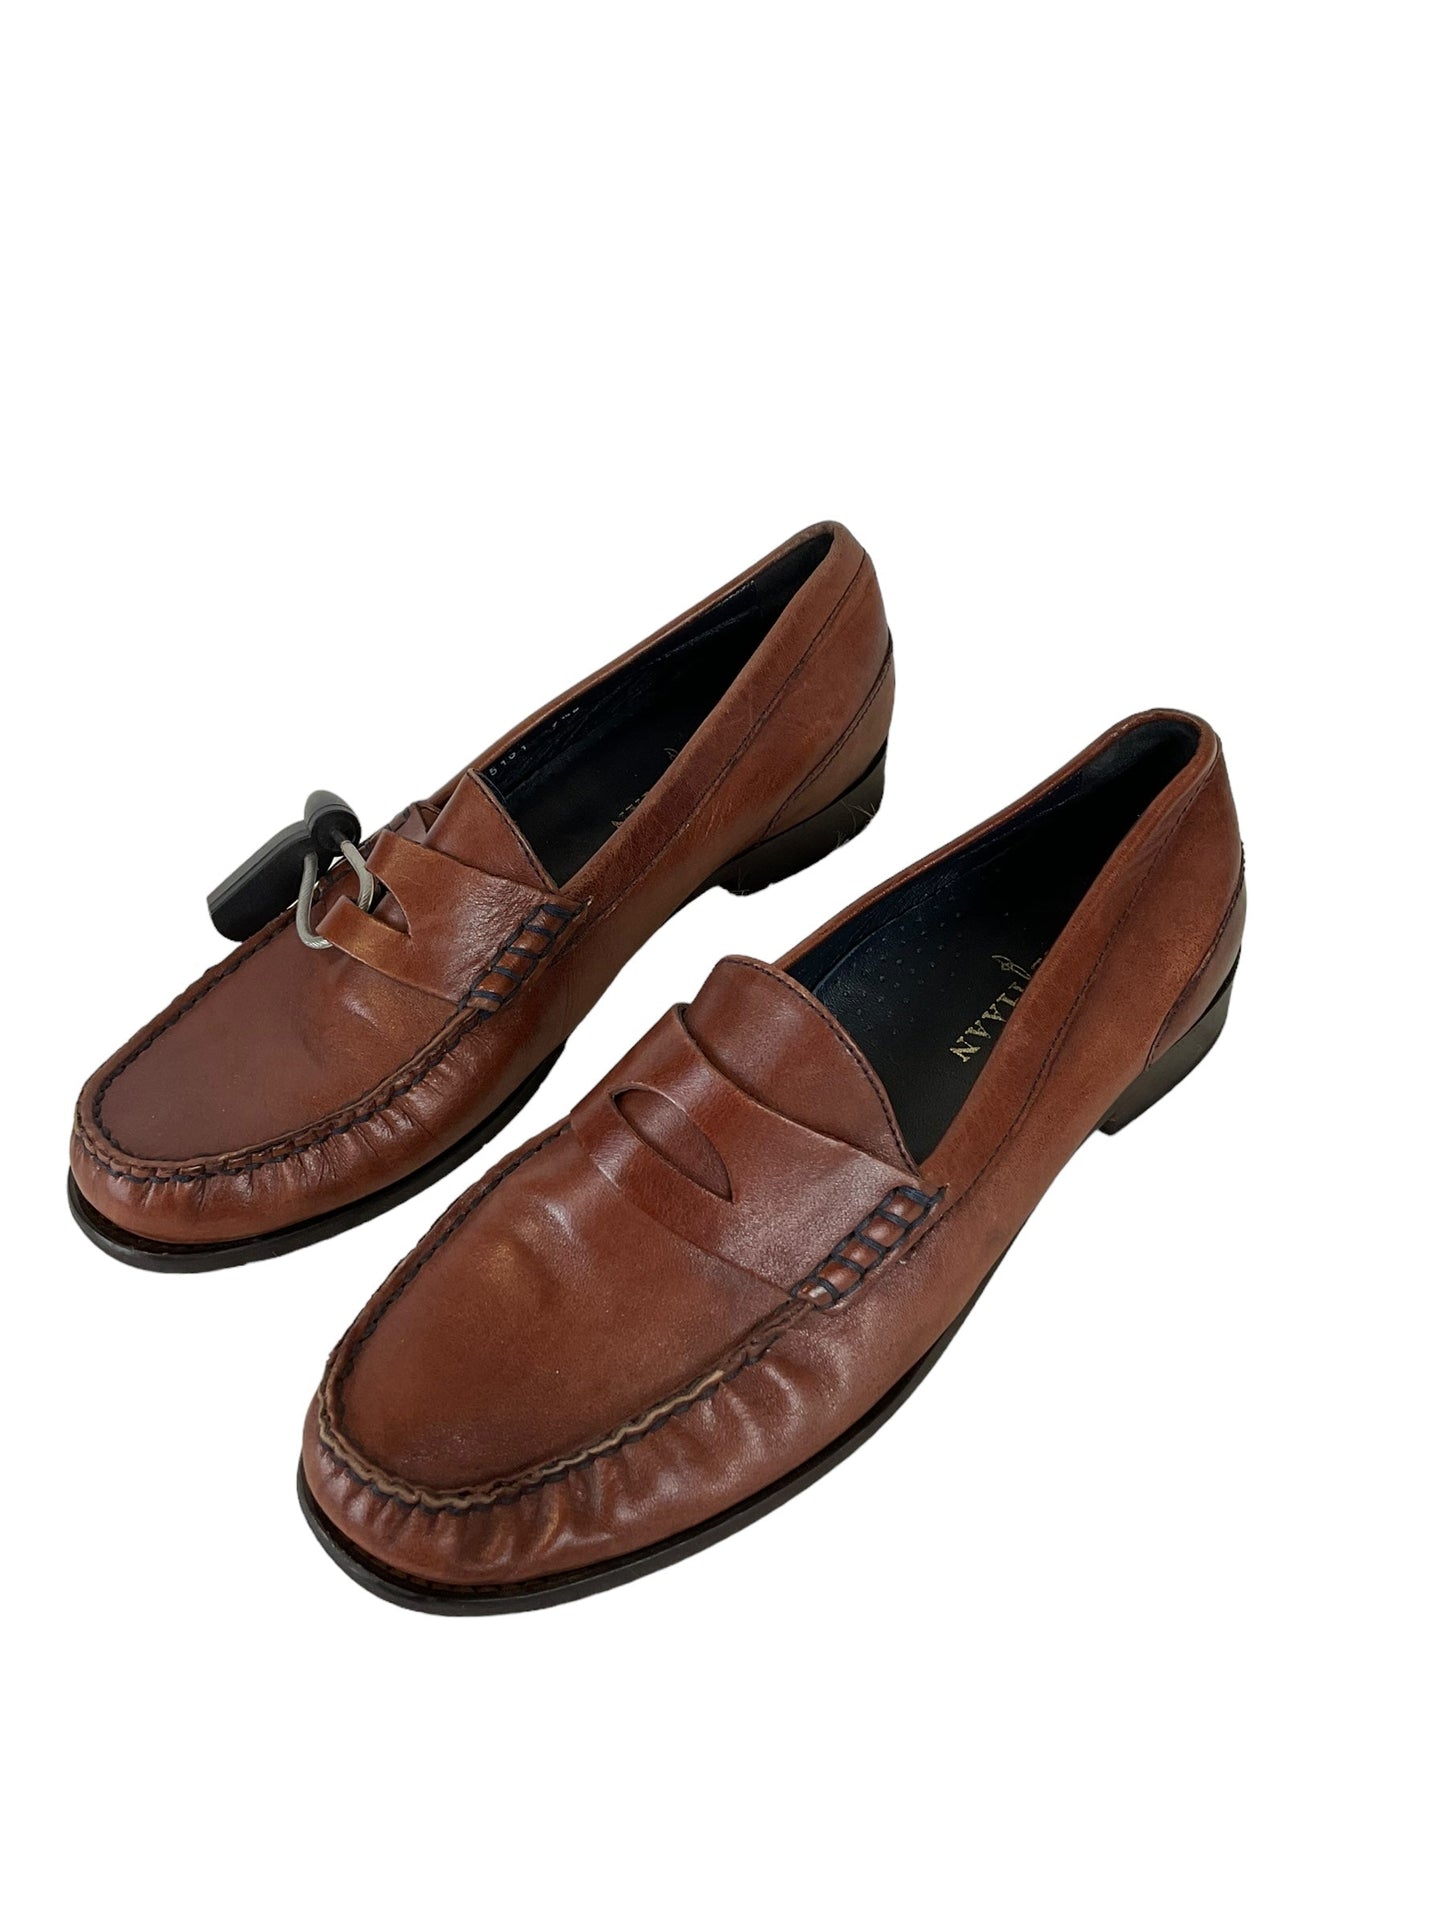 Brown Shoes Flats Cole-haan, Size 7.5